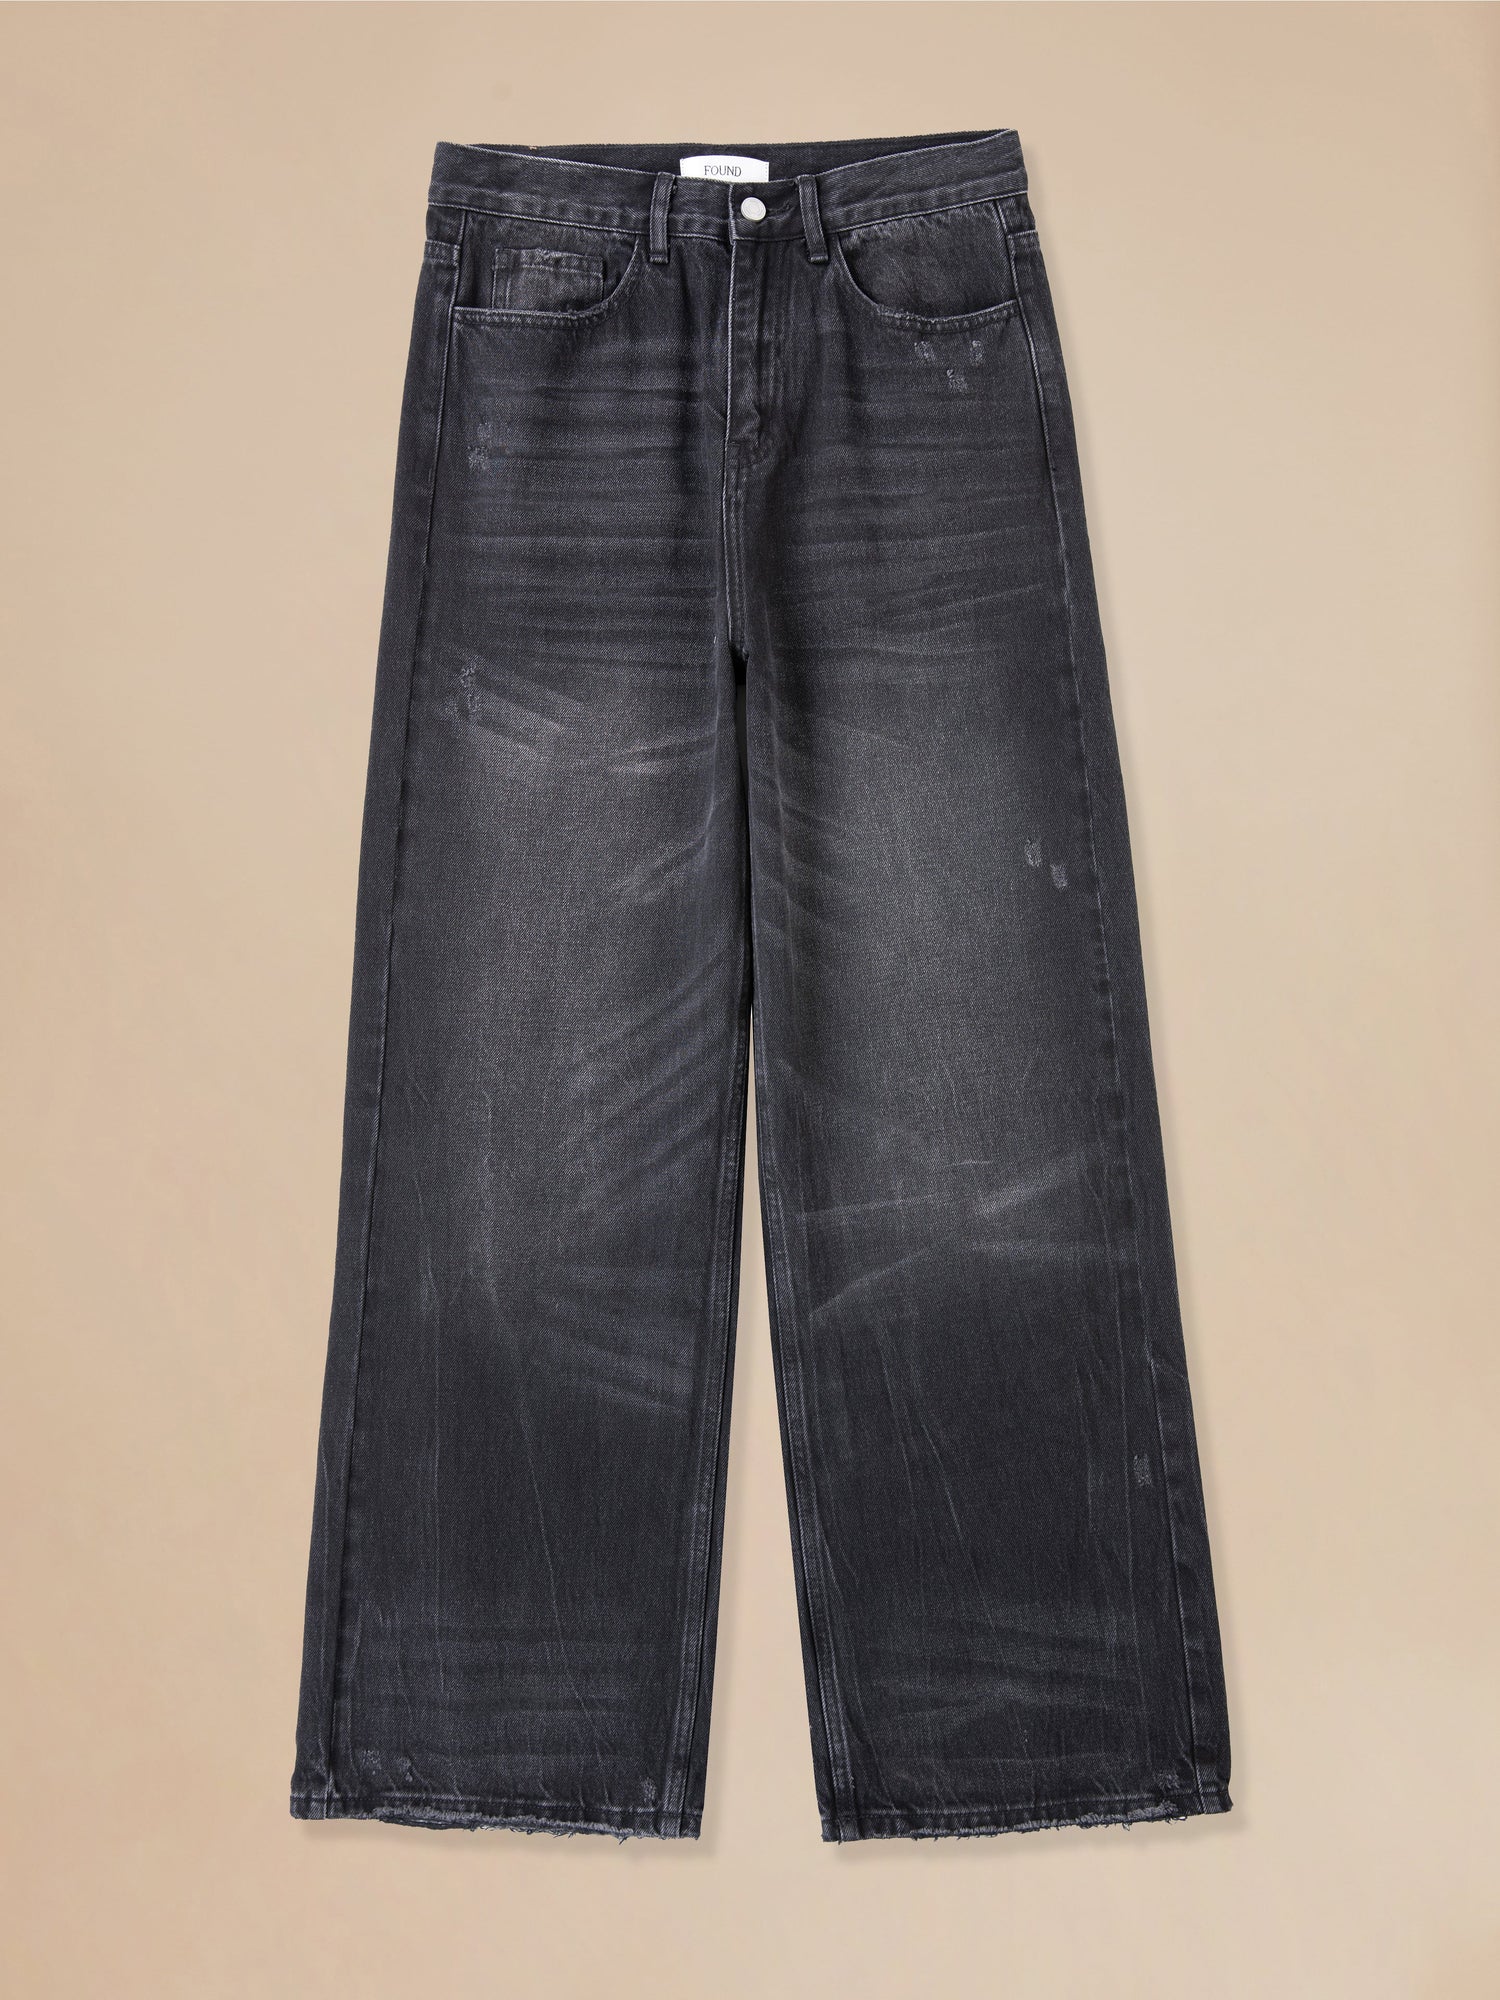 A pair of Found Lacy Baggy Jeans Vintage Black with distressed hems.